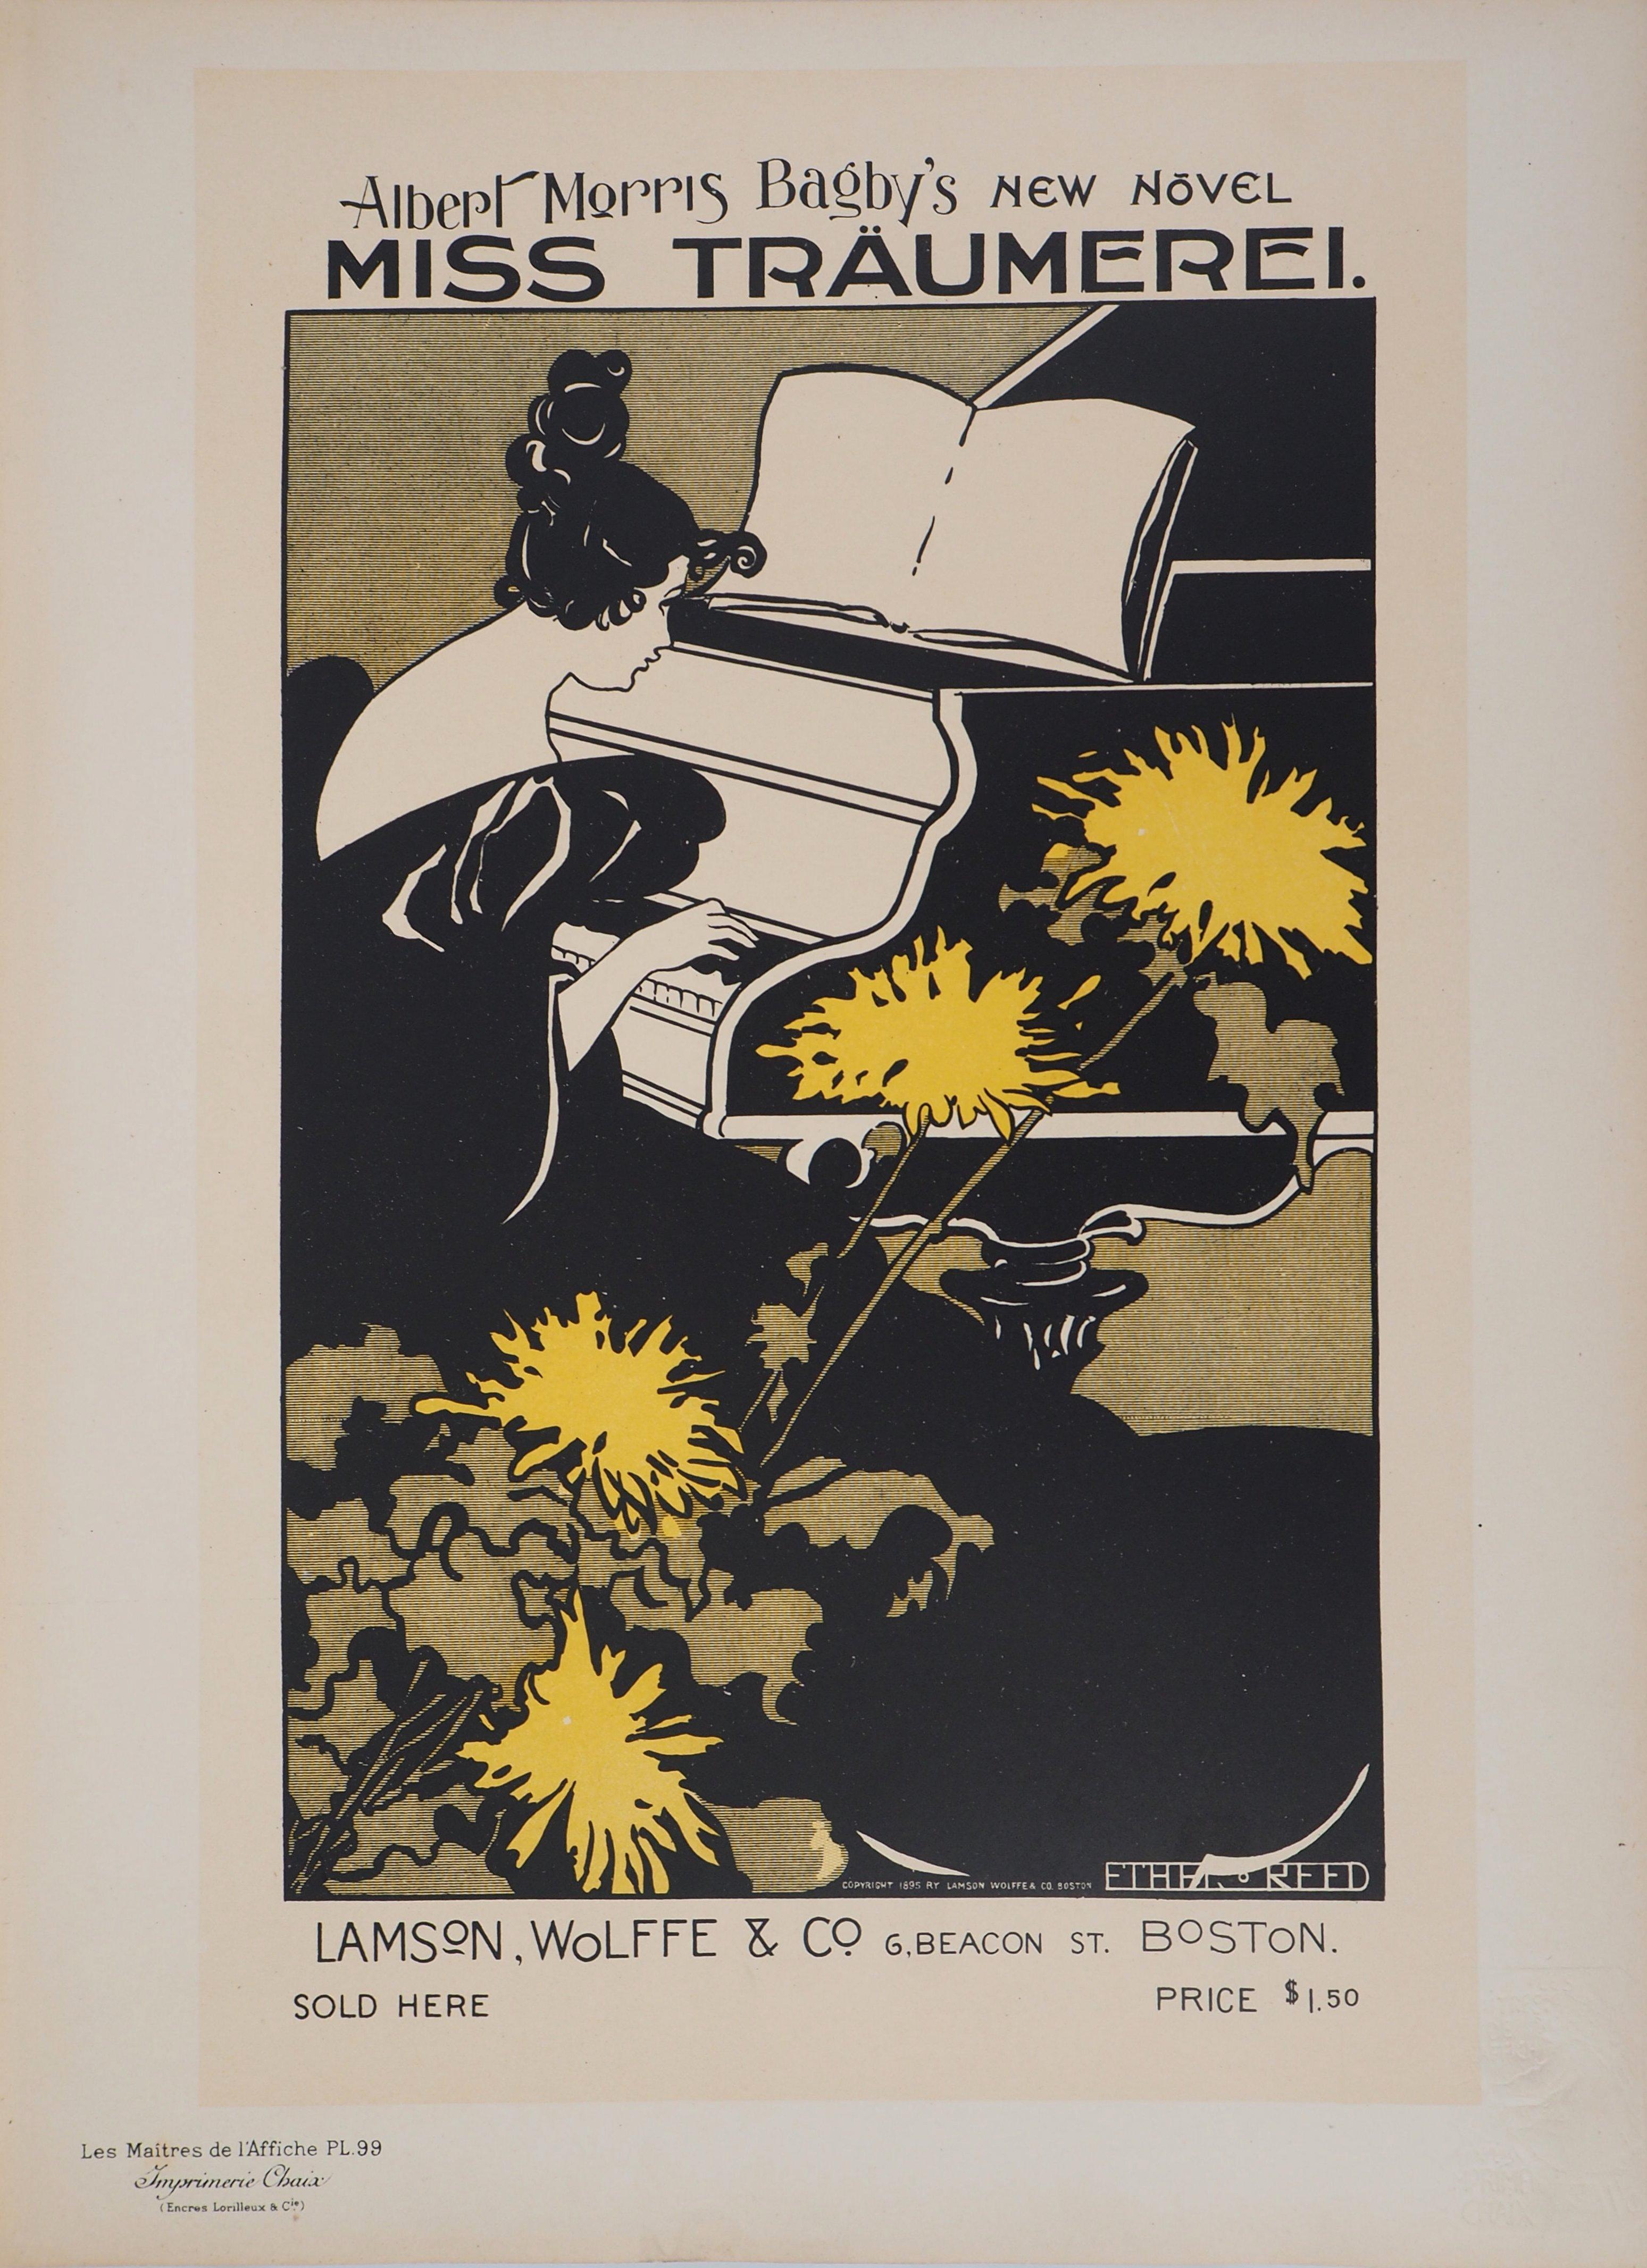 Young Girl at the Piano - Lithograph (Les Maîtres de l'Affiche), 1897 - Print by Ethel Reed